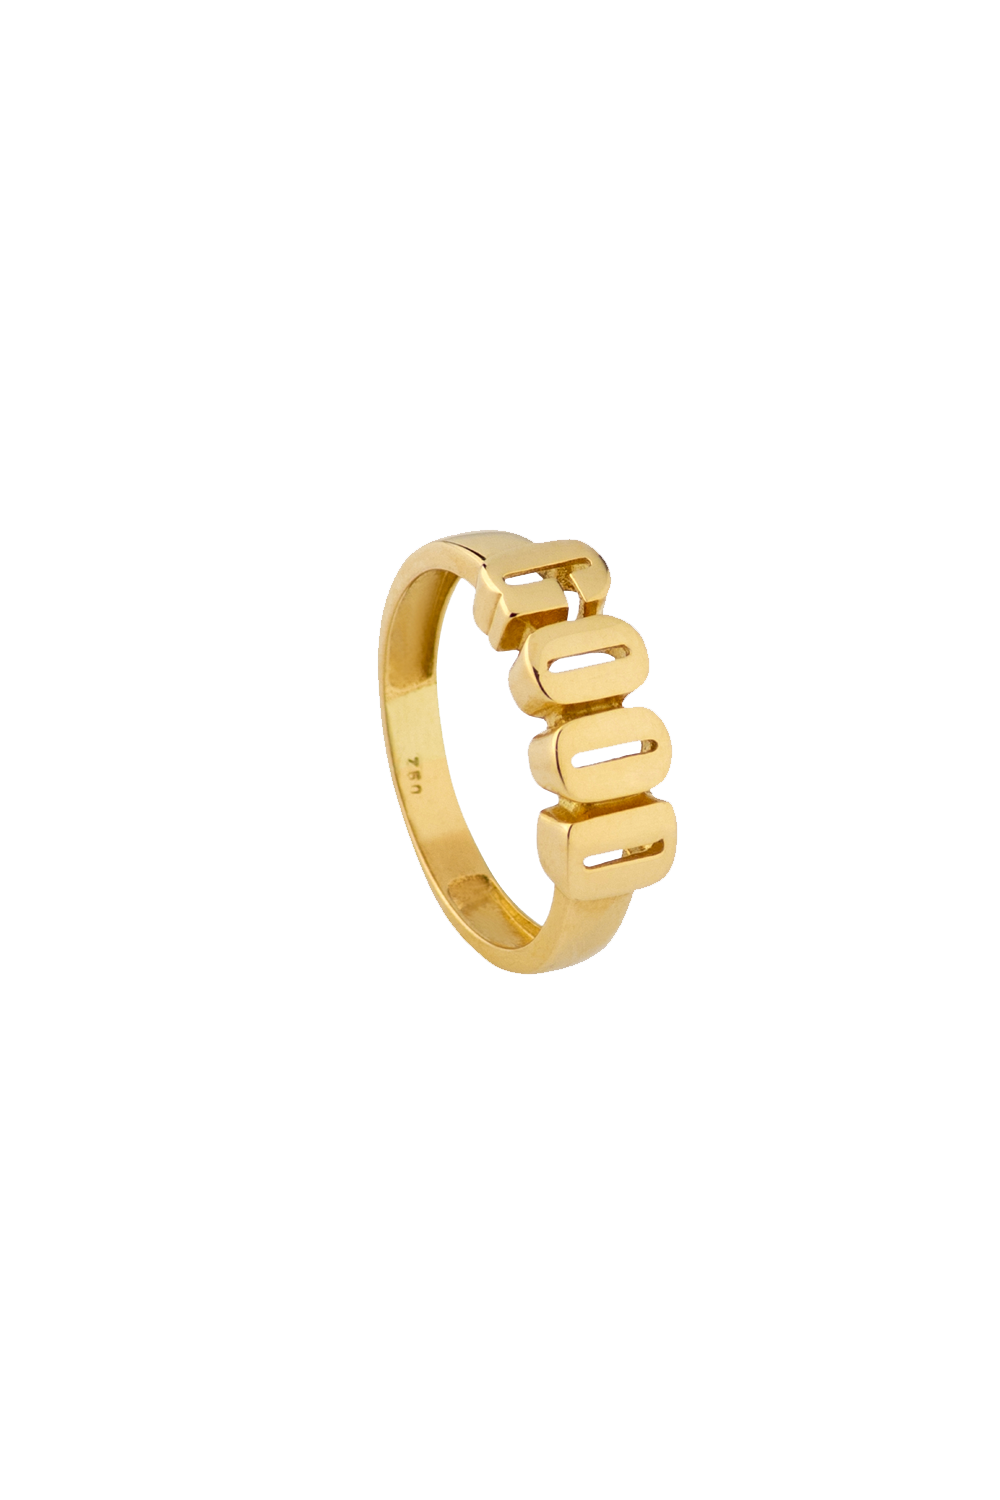 The Fine Gold Good Ring